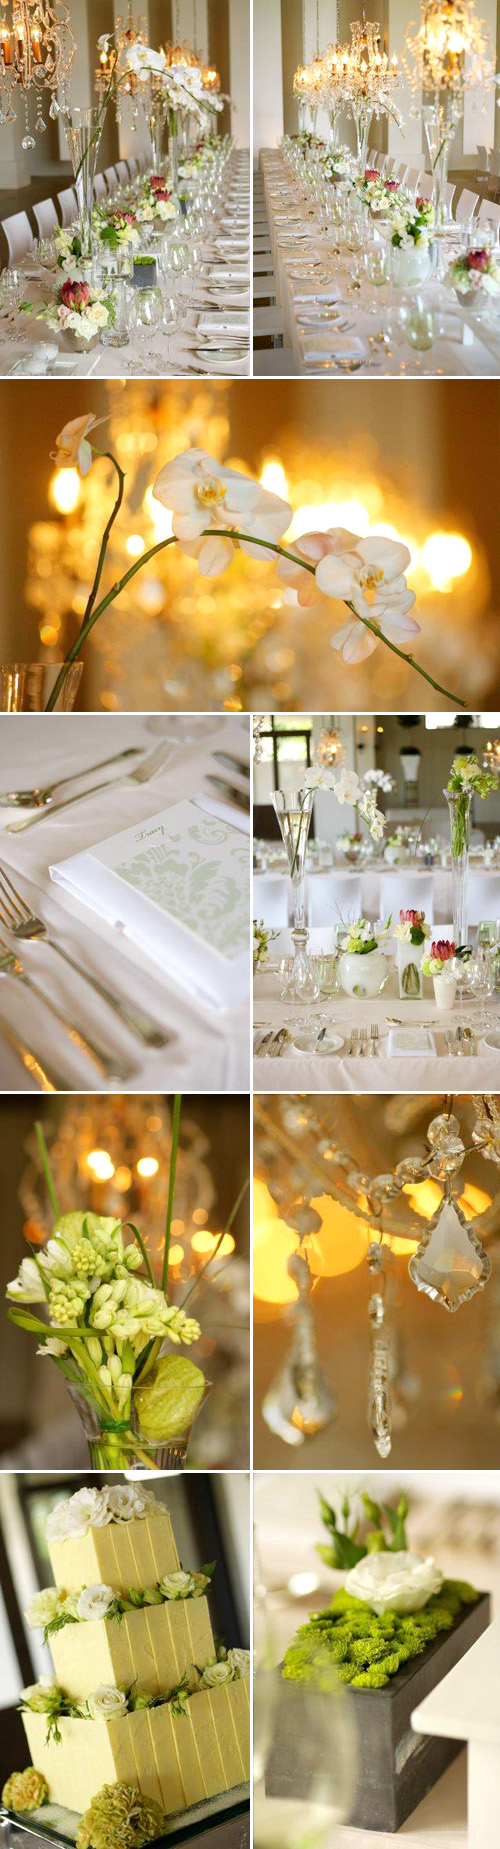 cape town south africa modern real wedding, sage green and white wedding color palette, designed by wedding concepts and photographed by jean-pierre uys photography